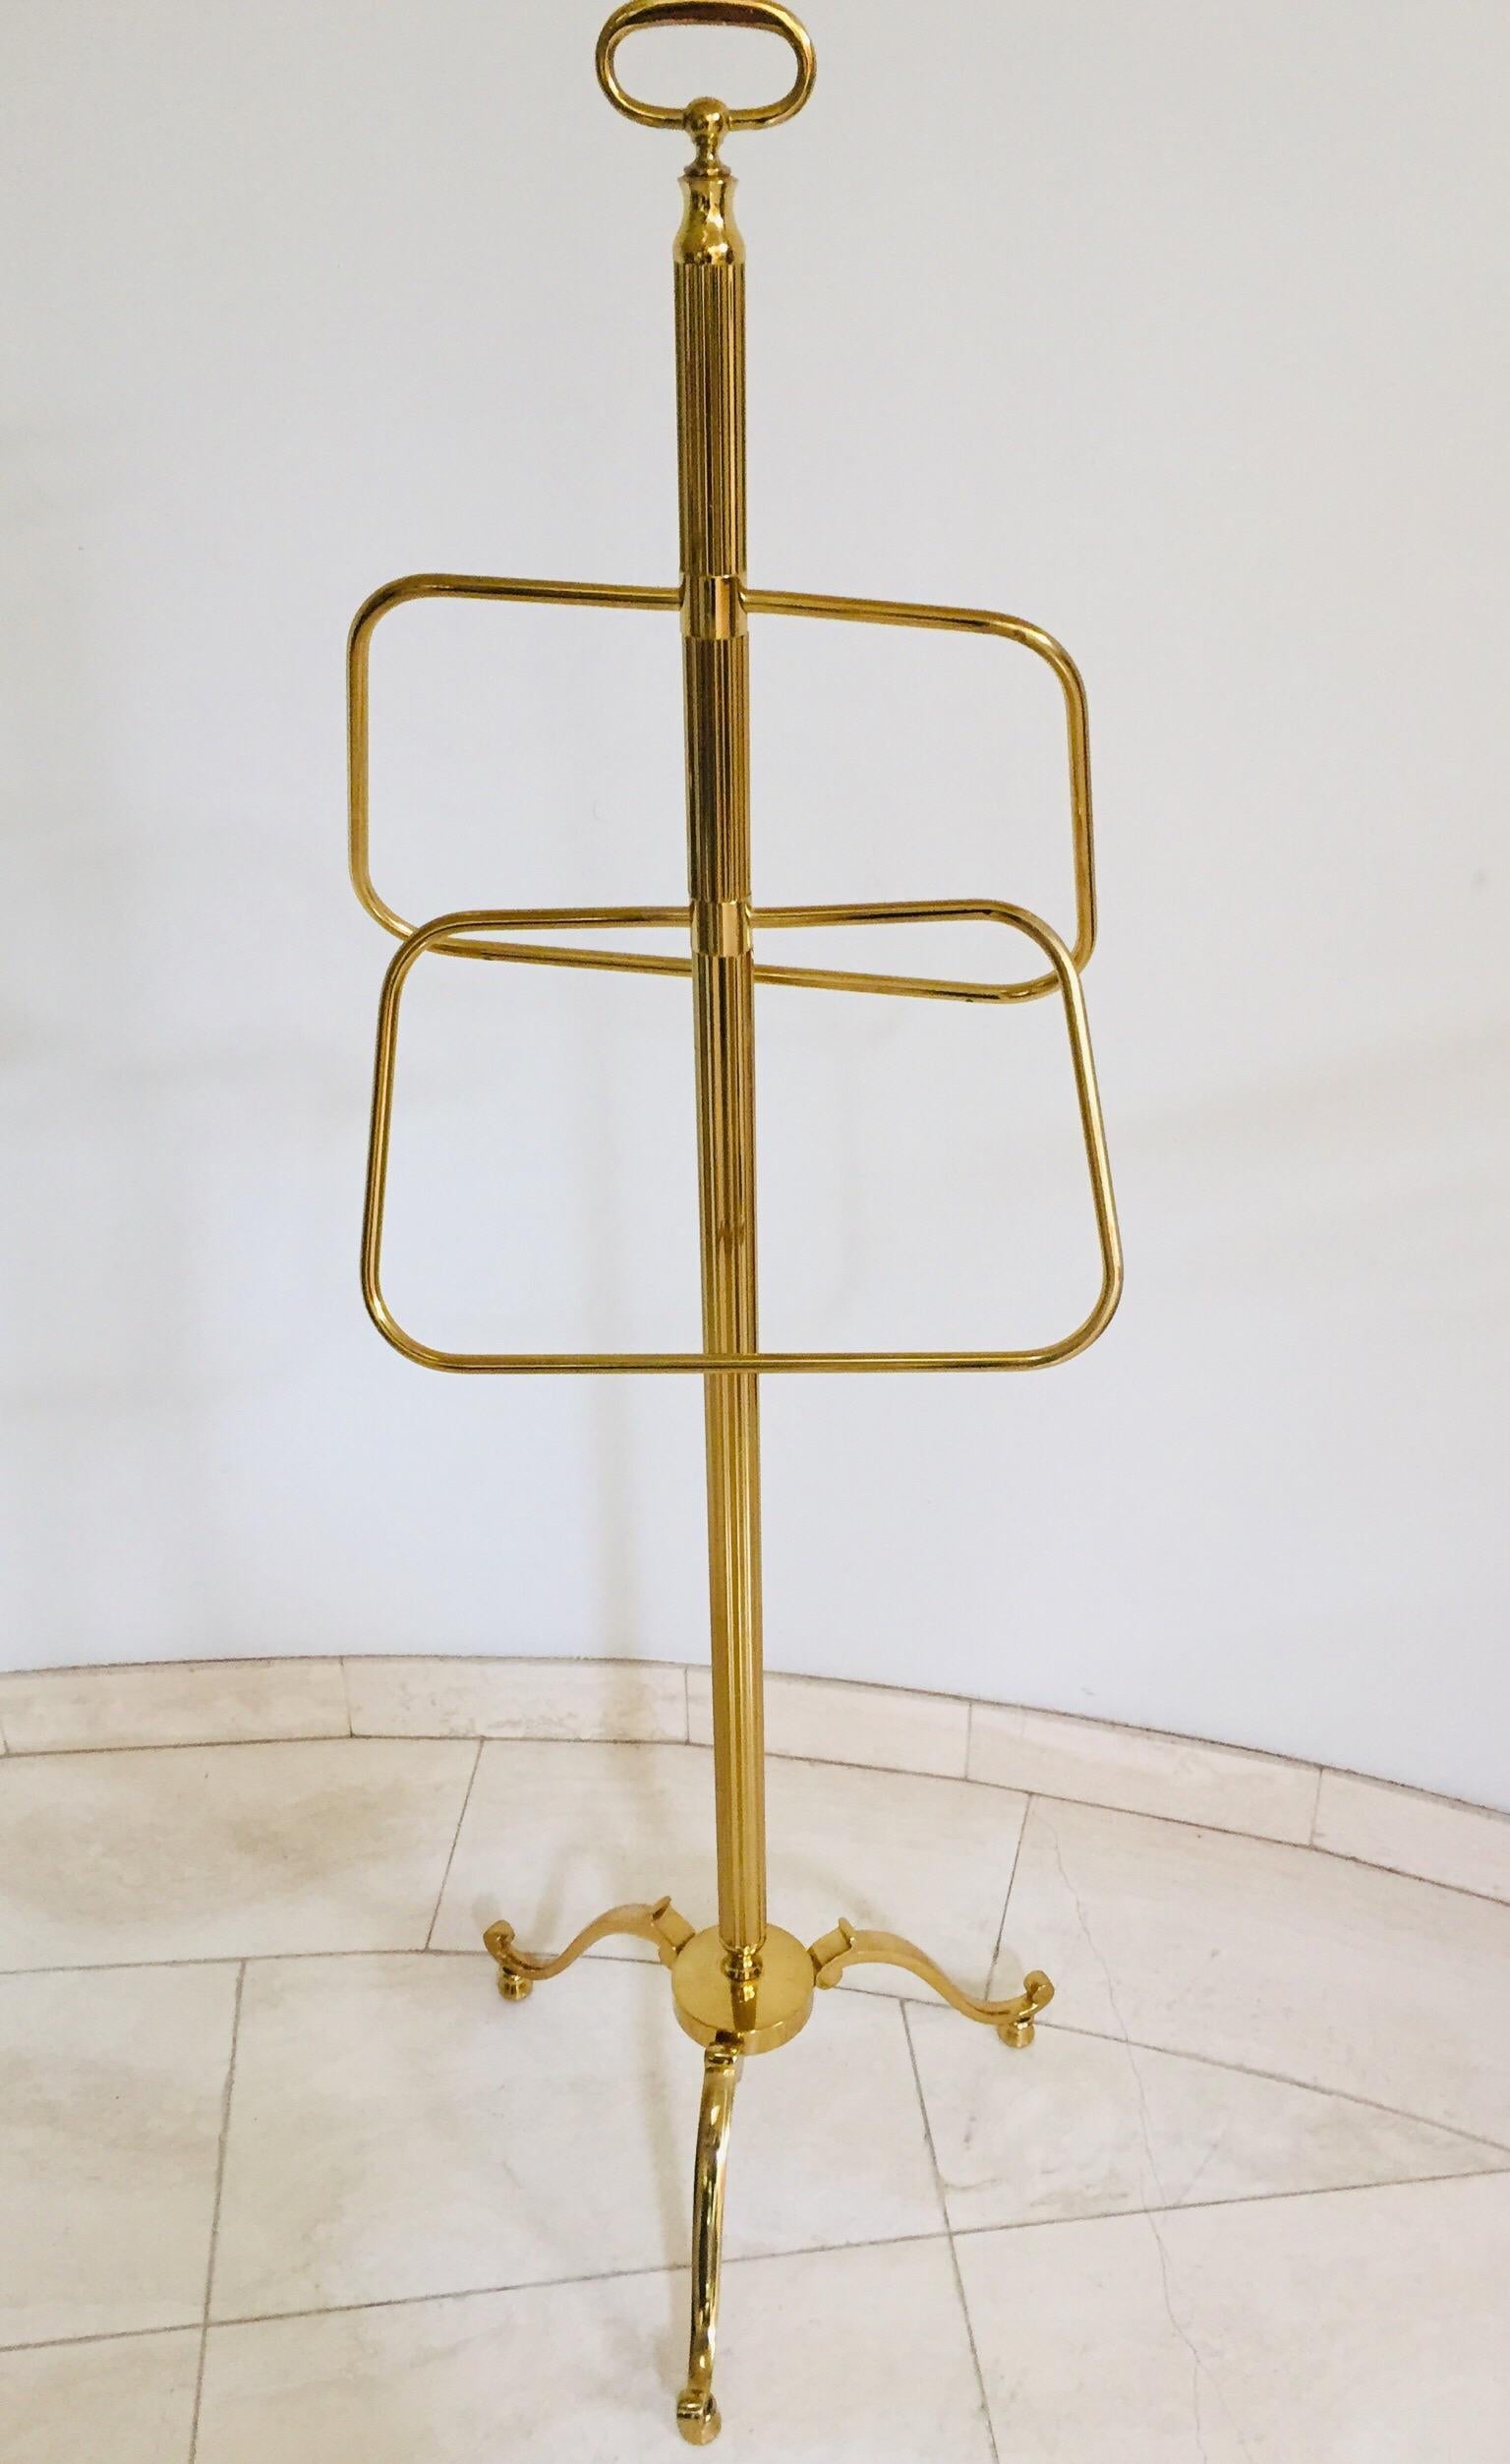 Stylish Italian polished brass glamorous valet stand.
A super elegant brass valet on tripod base with brass caster wheels. 
Marked 'Made in Italy', the piece is attributed to Maison Jansen.
Impressive Master craft Post Modern polished brass valet